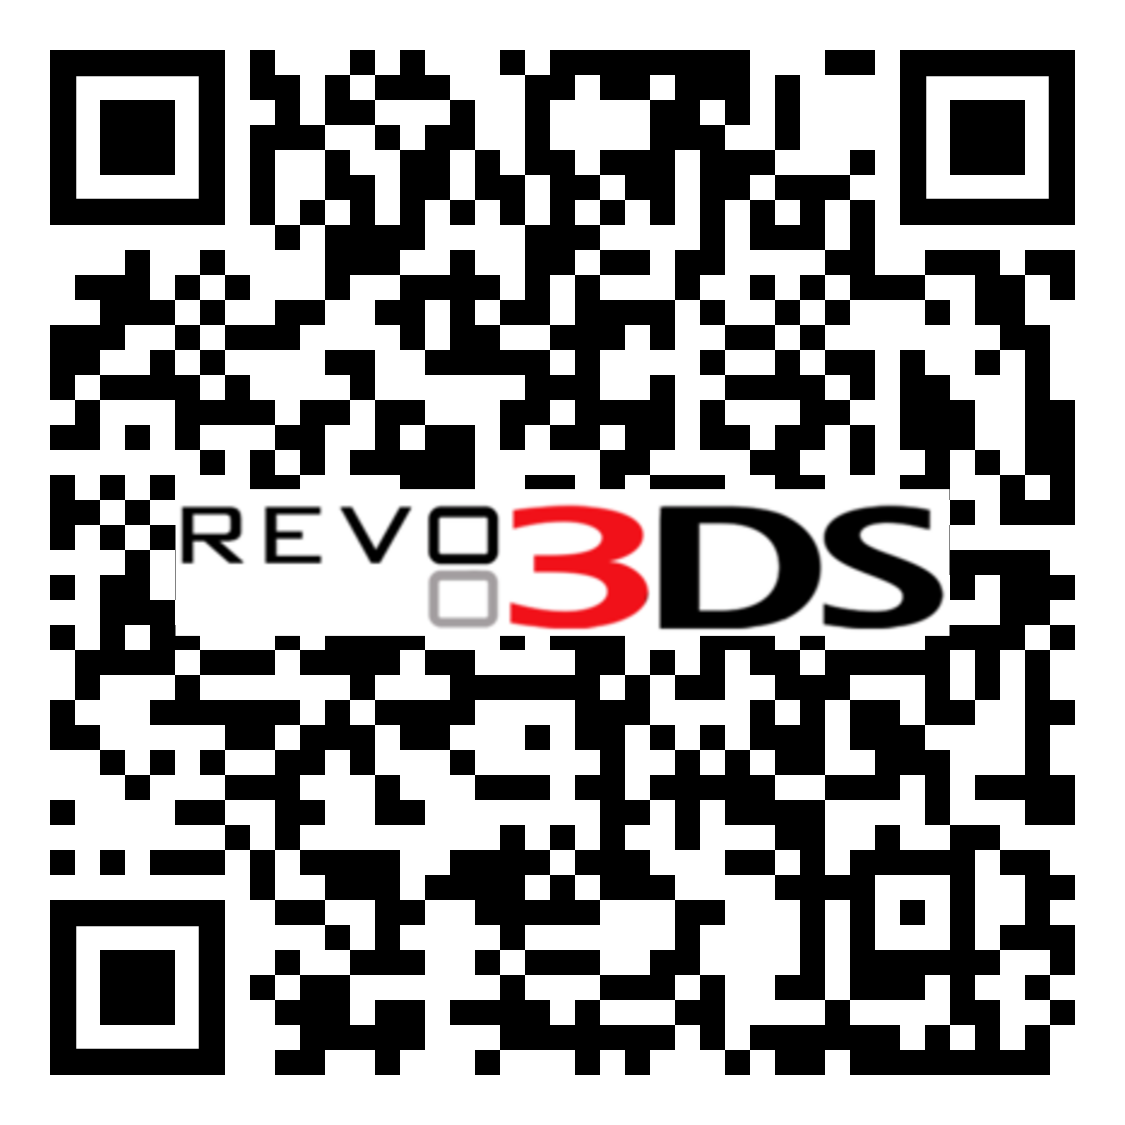 to share qr codes for games, homebrew apps, and game ports for use to downl...